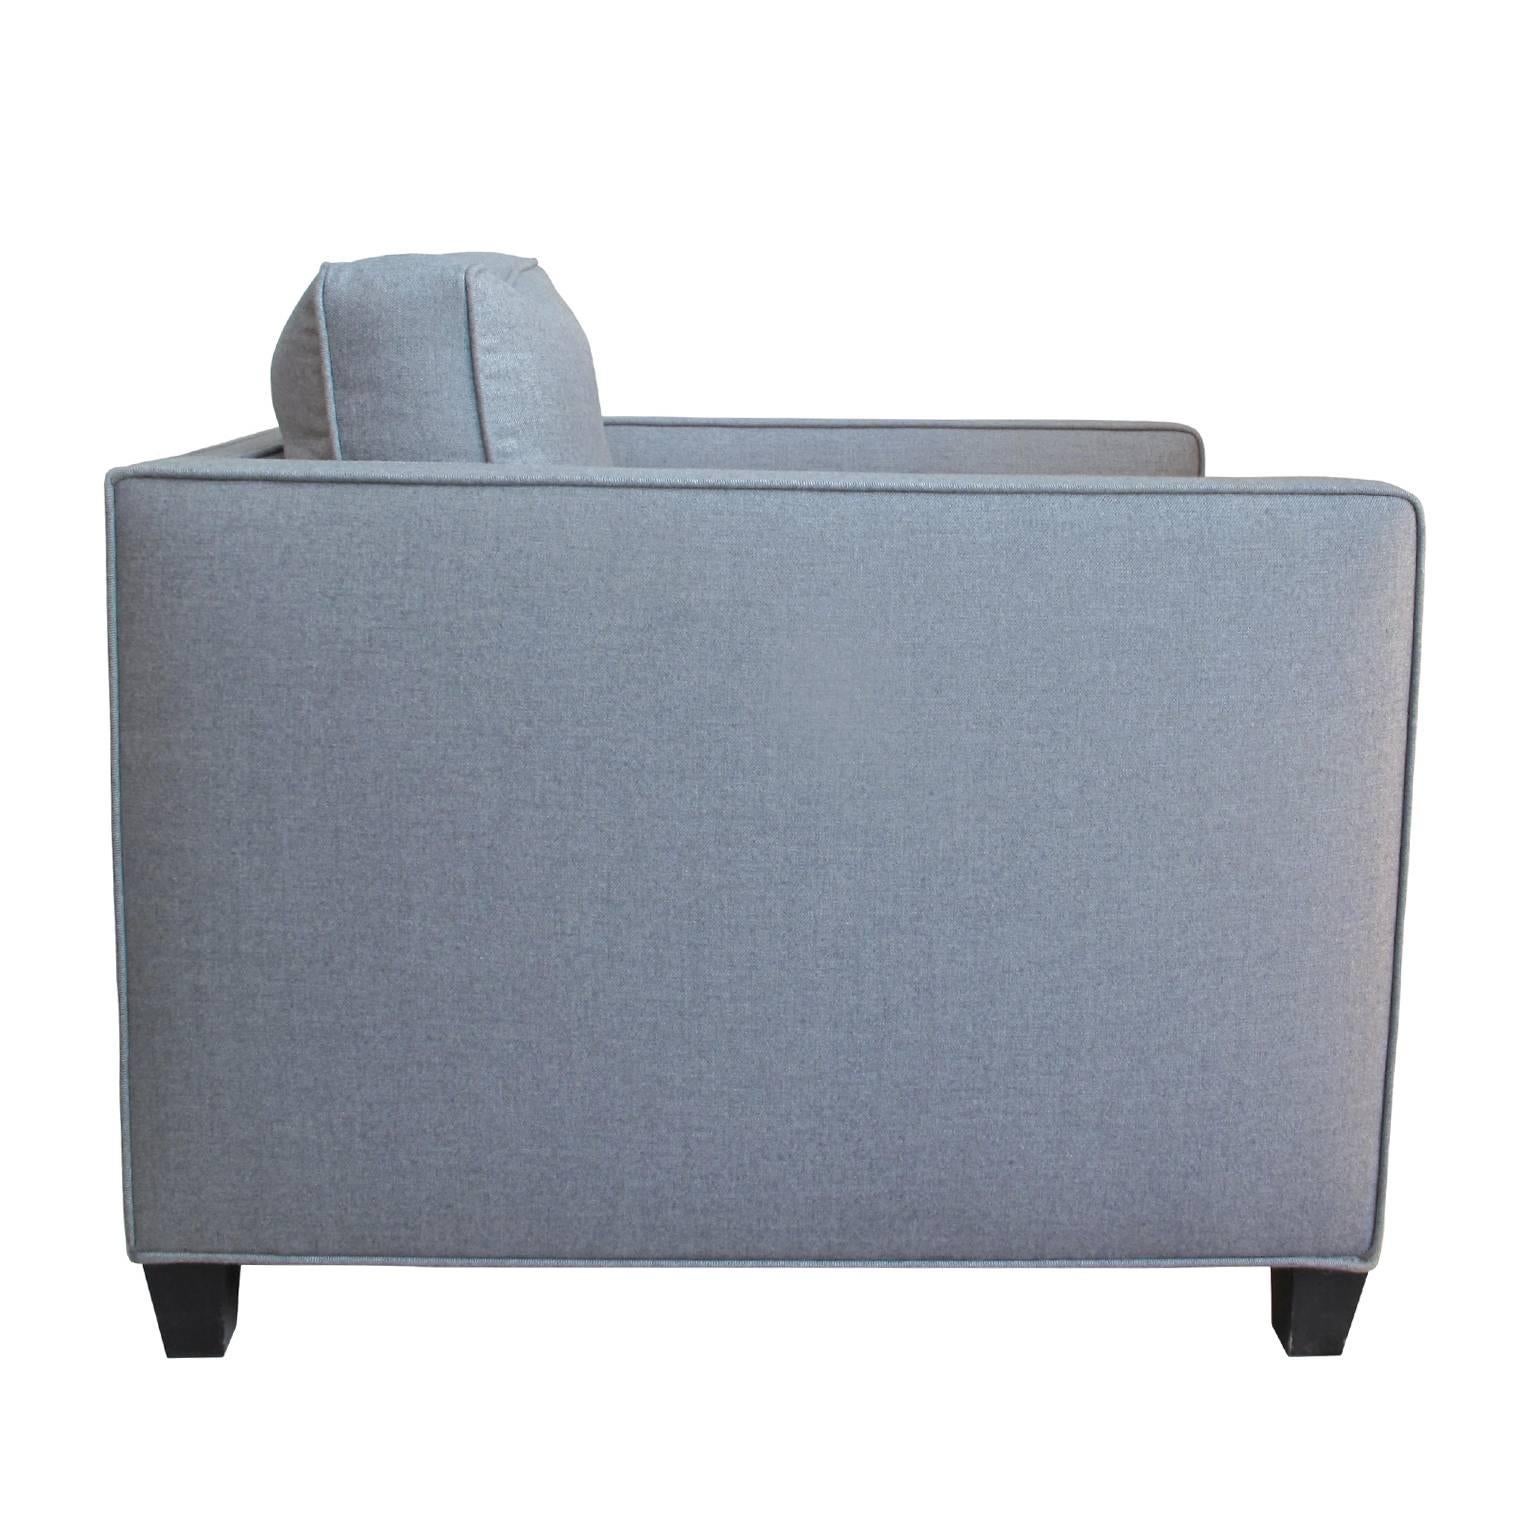 Flair Home collection custom Roma cube club chair, upholstered in grey flannel.

The simple and elegant proportions of our custom Roma chair make it suitable for many different settings and design styles.